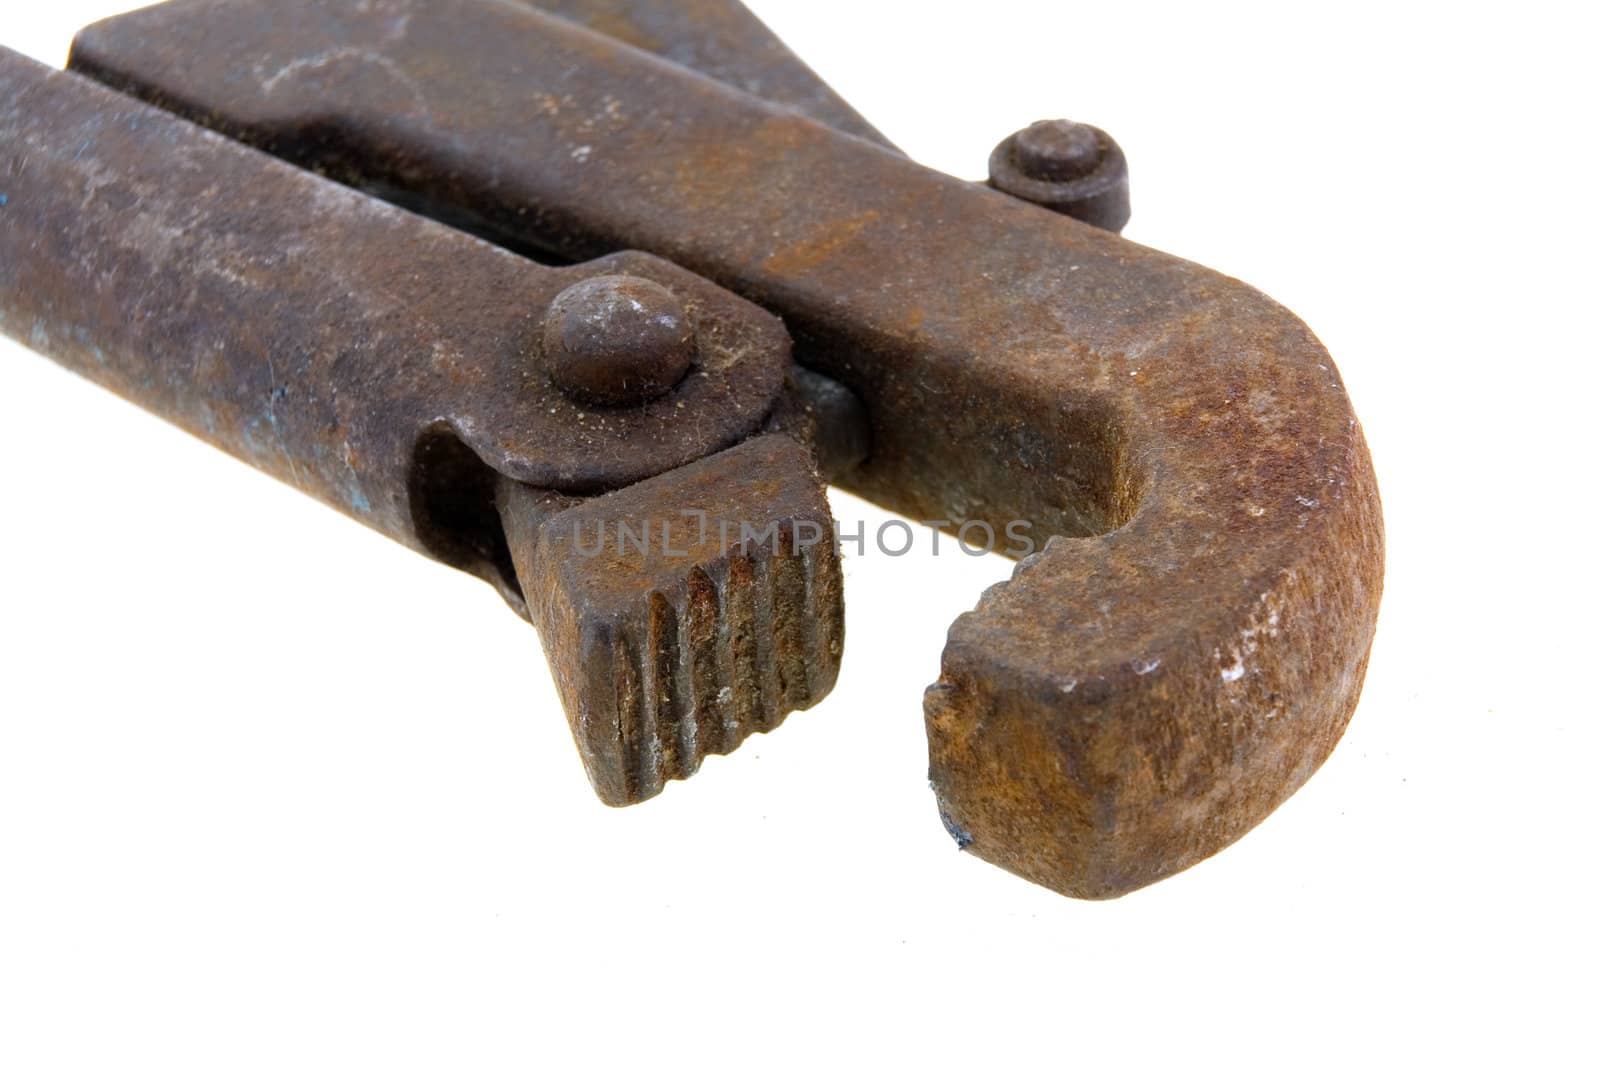 Big used rusty wrench on white background.